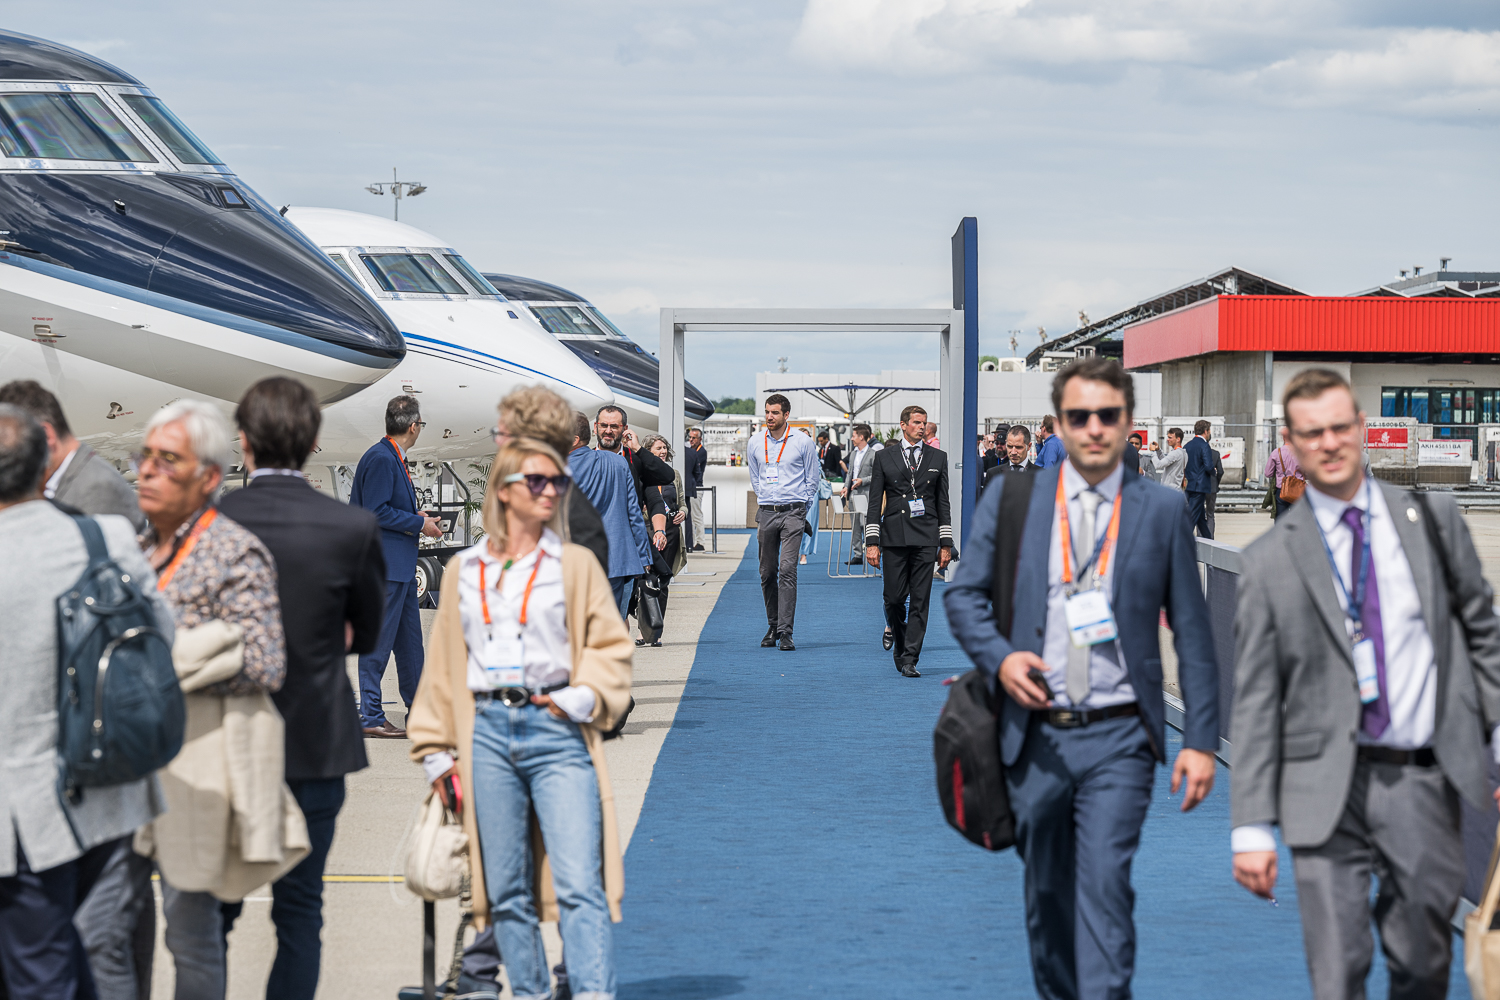 Attendees network and tour the Display of Aircraft at the Geneva Airport on Tuesday during EBACE2022